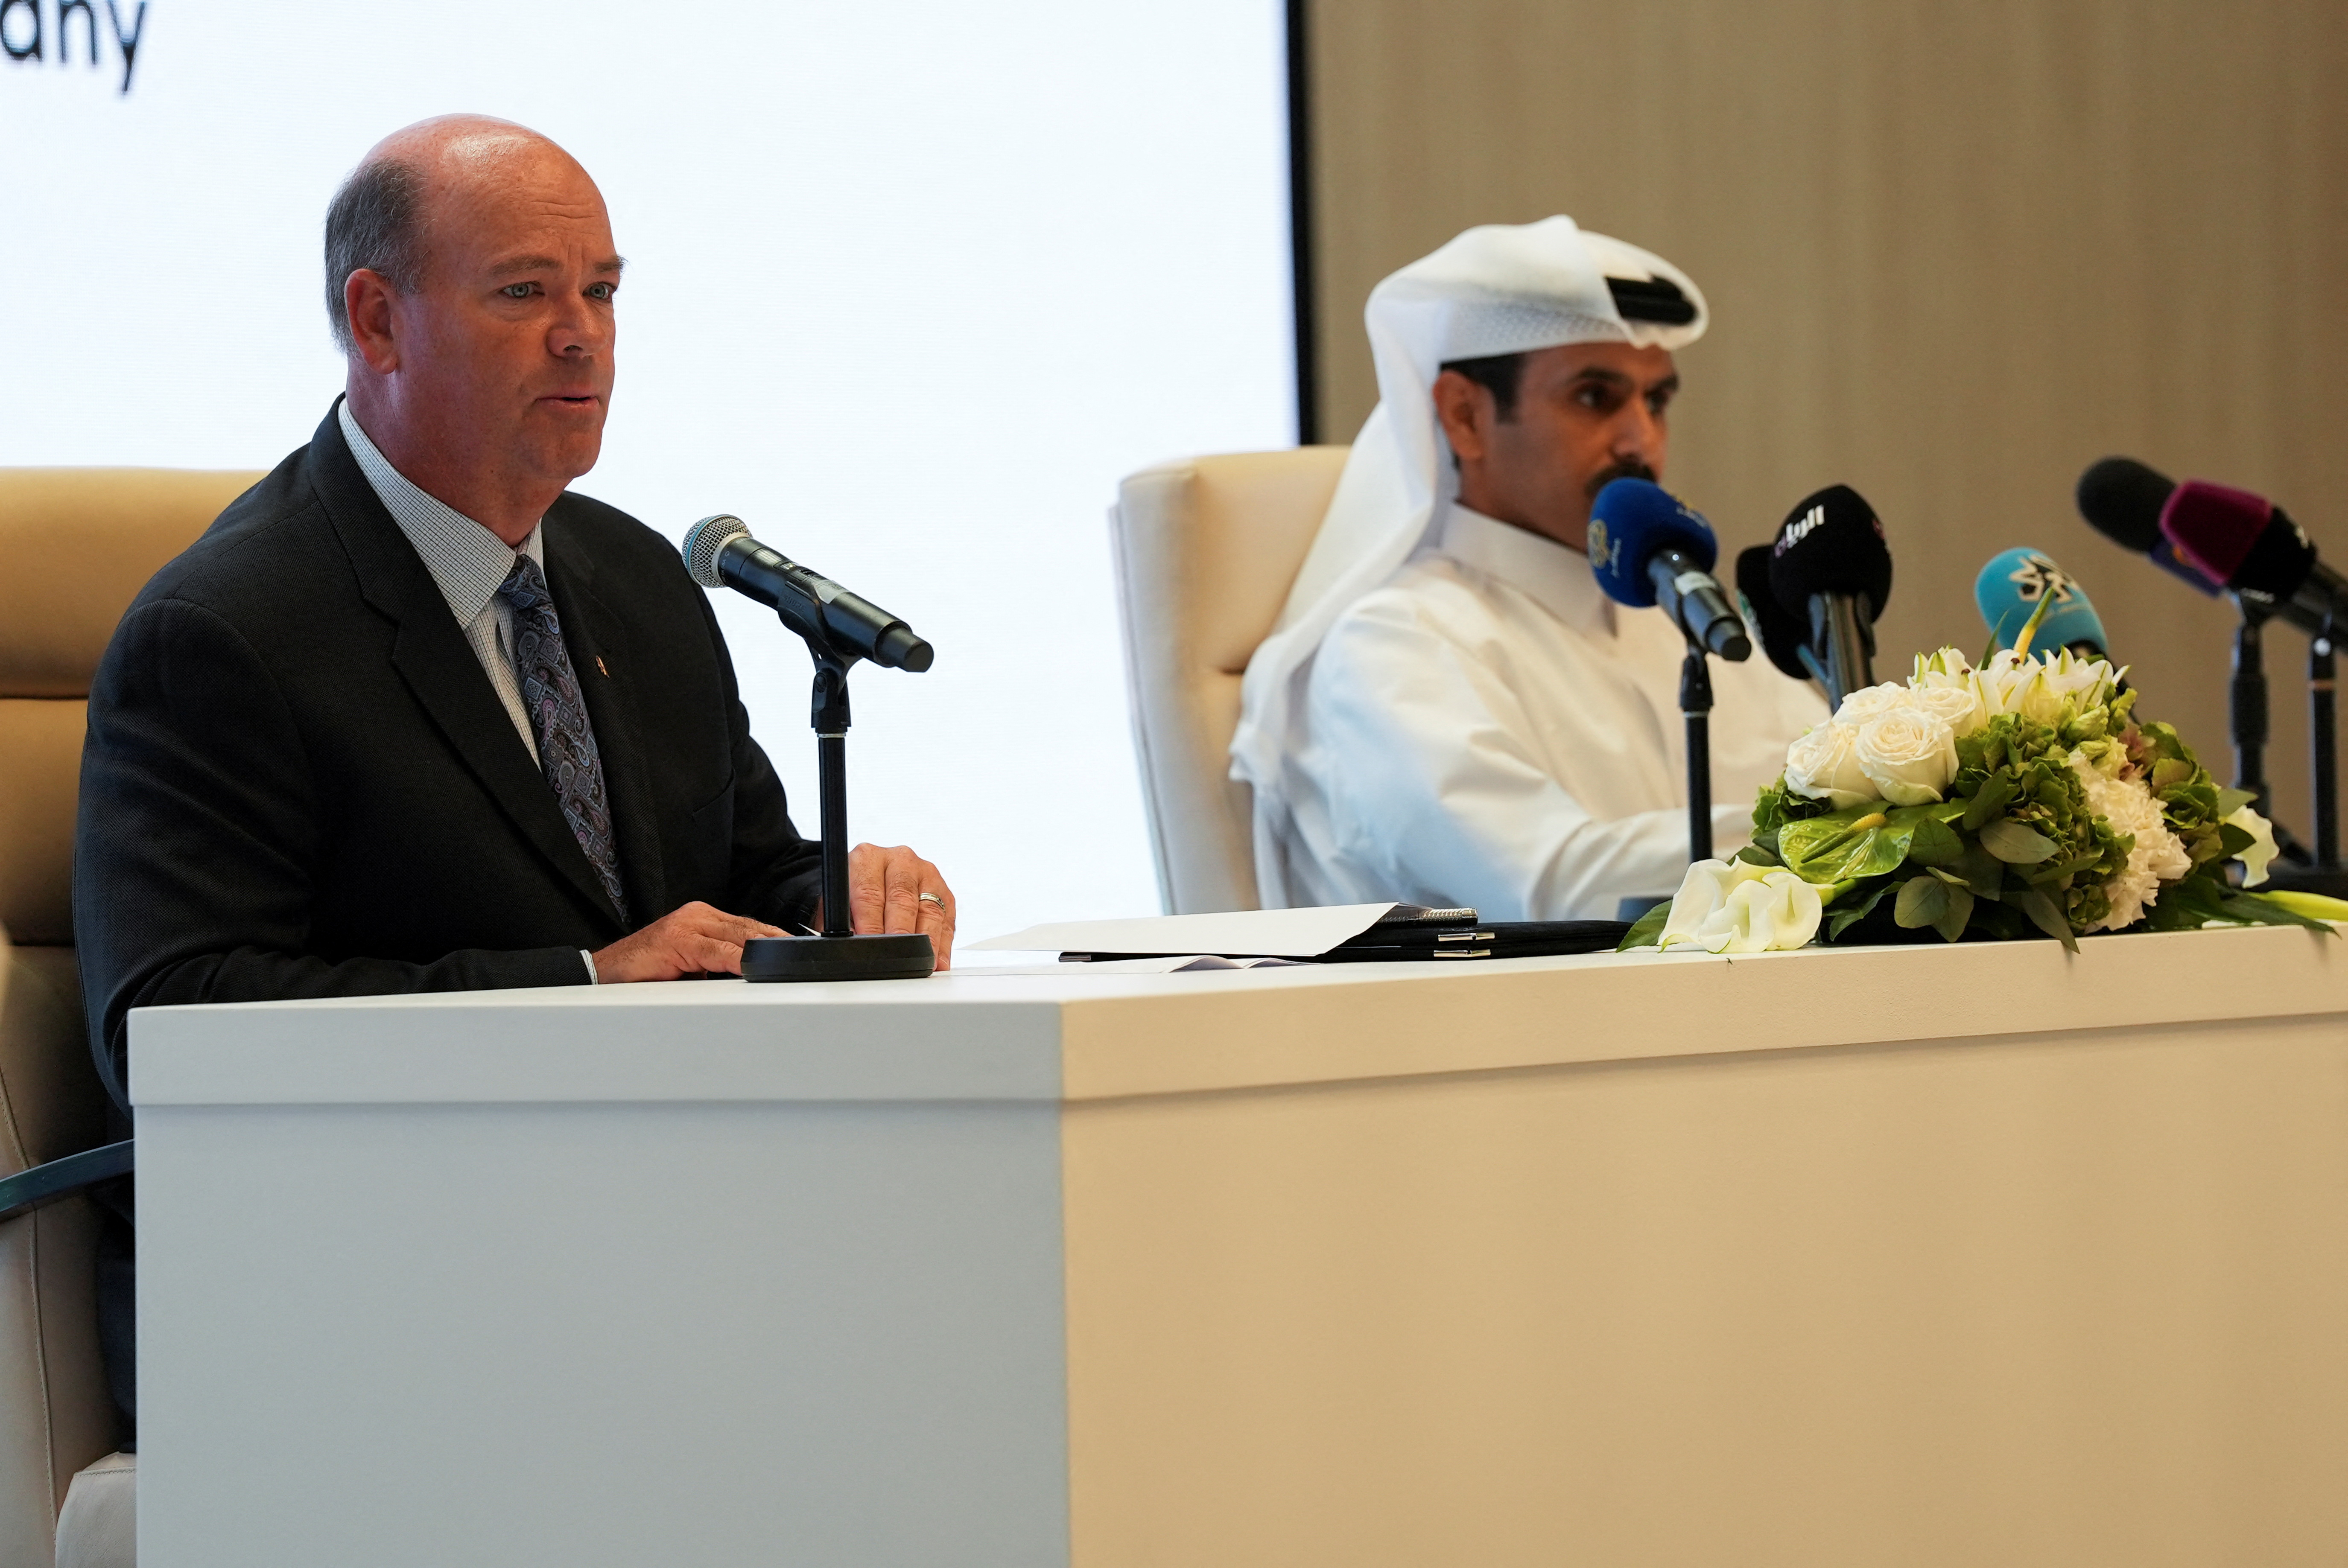 Signing ceremony of two sales and purchase agreements to export liquefied natural gas (LNG) to Germany, in Doha